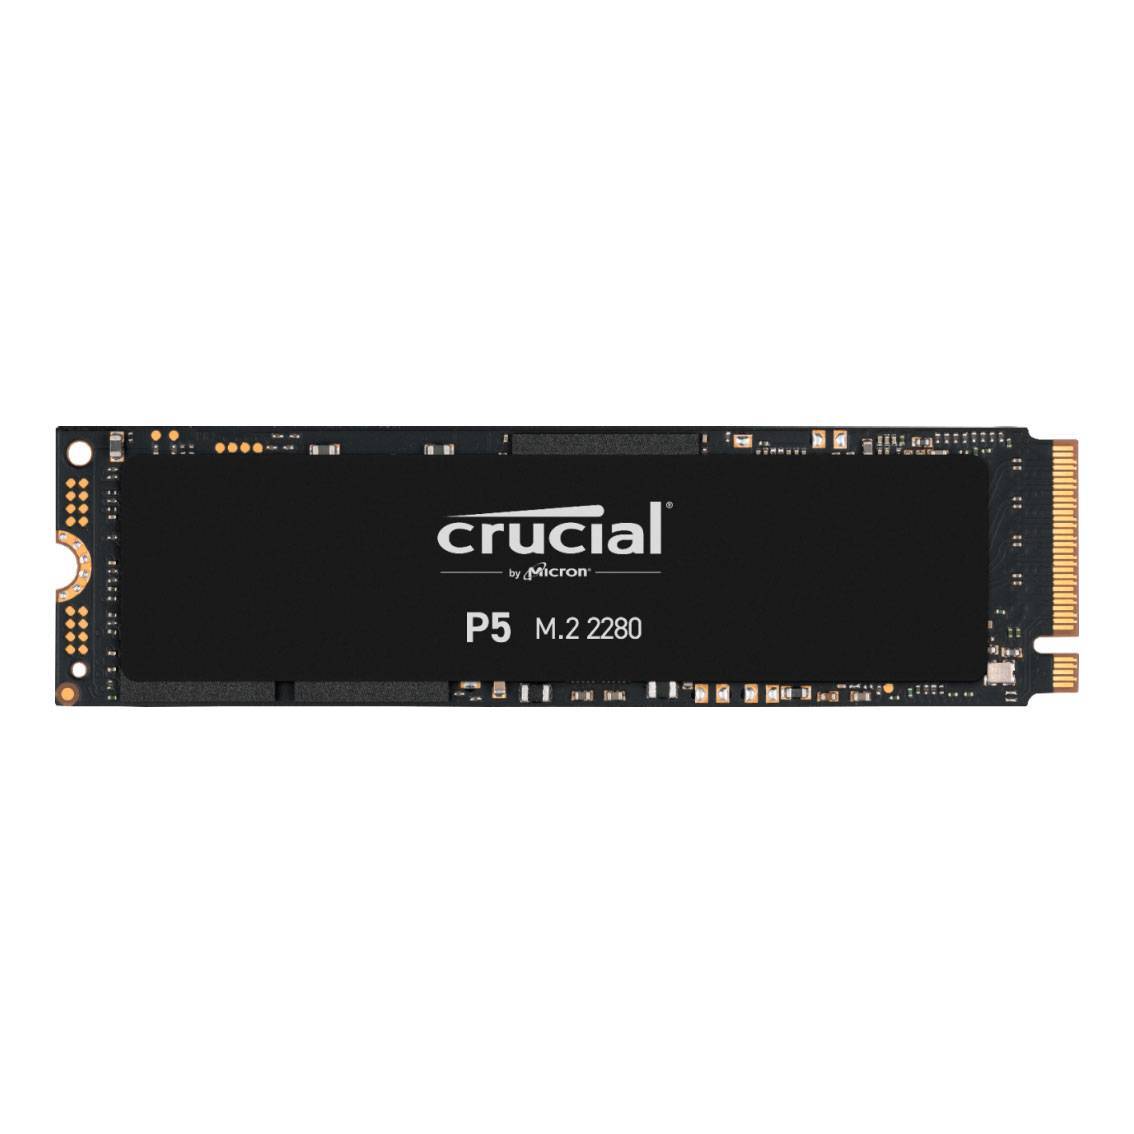 M2 PCIe2TB Crucial P5 3400MB/s 2280